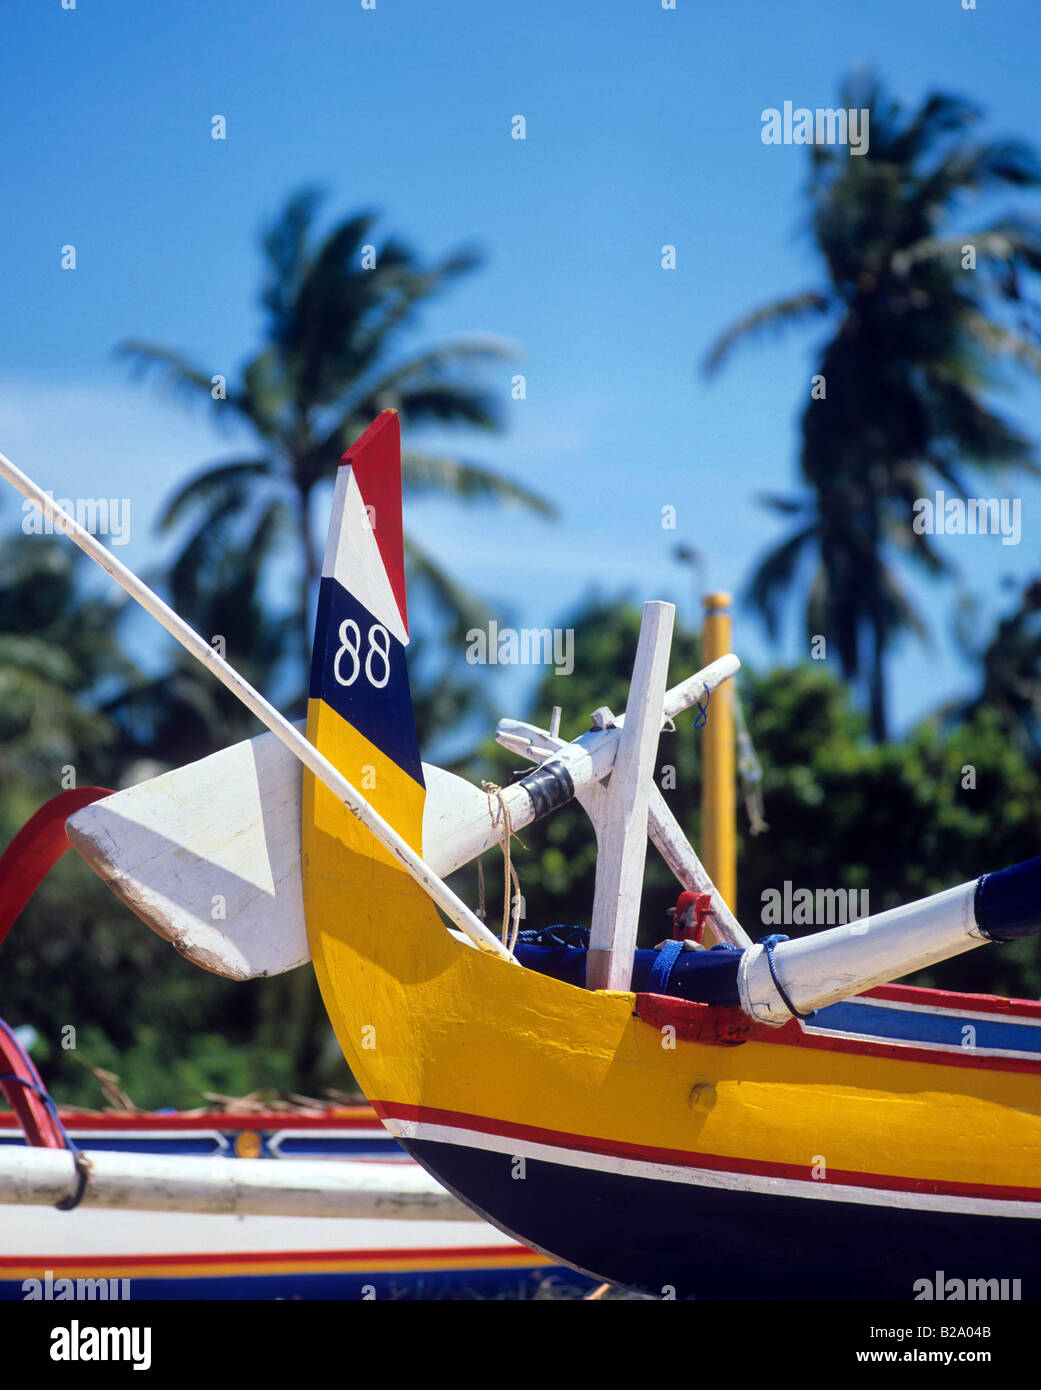 Outrigger boat Bali Indonesia Date 28 03 2008 Ref WP B548 111653 0047 COMPULSORY CREDIT World Pictures Photoshot Stock Photo